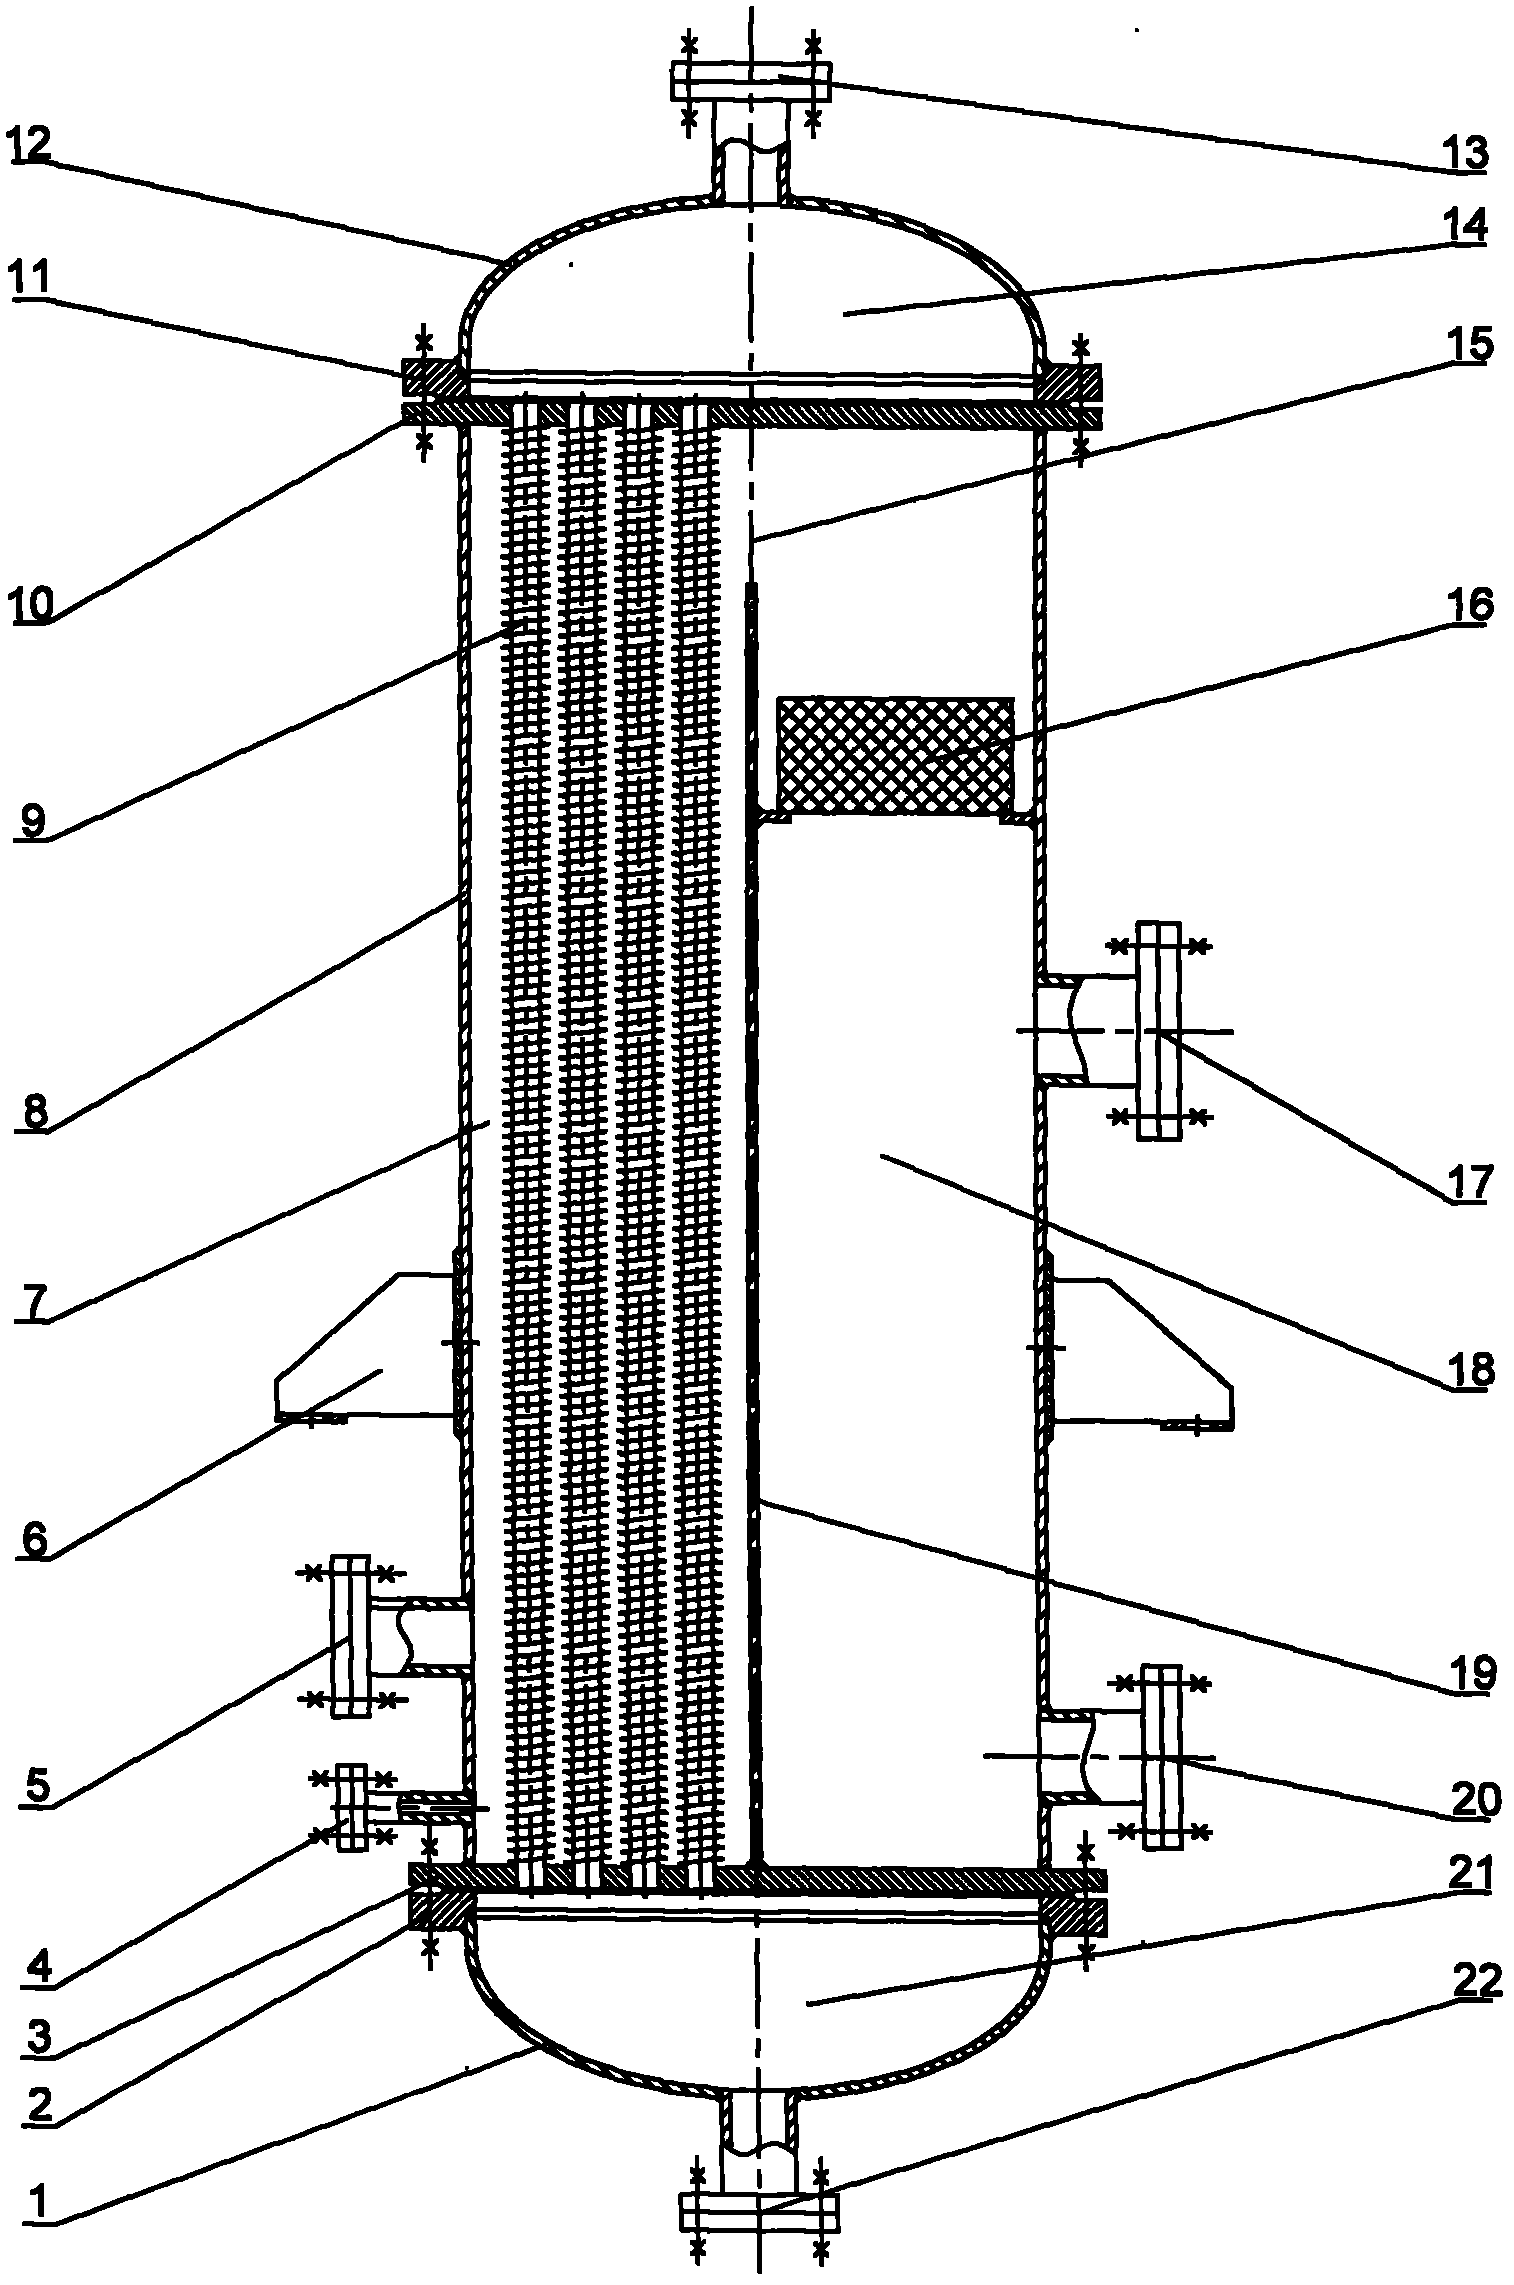 Flash-evaporation and condensation integrated seawater desalinization device